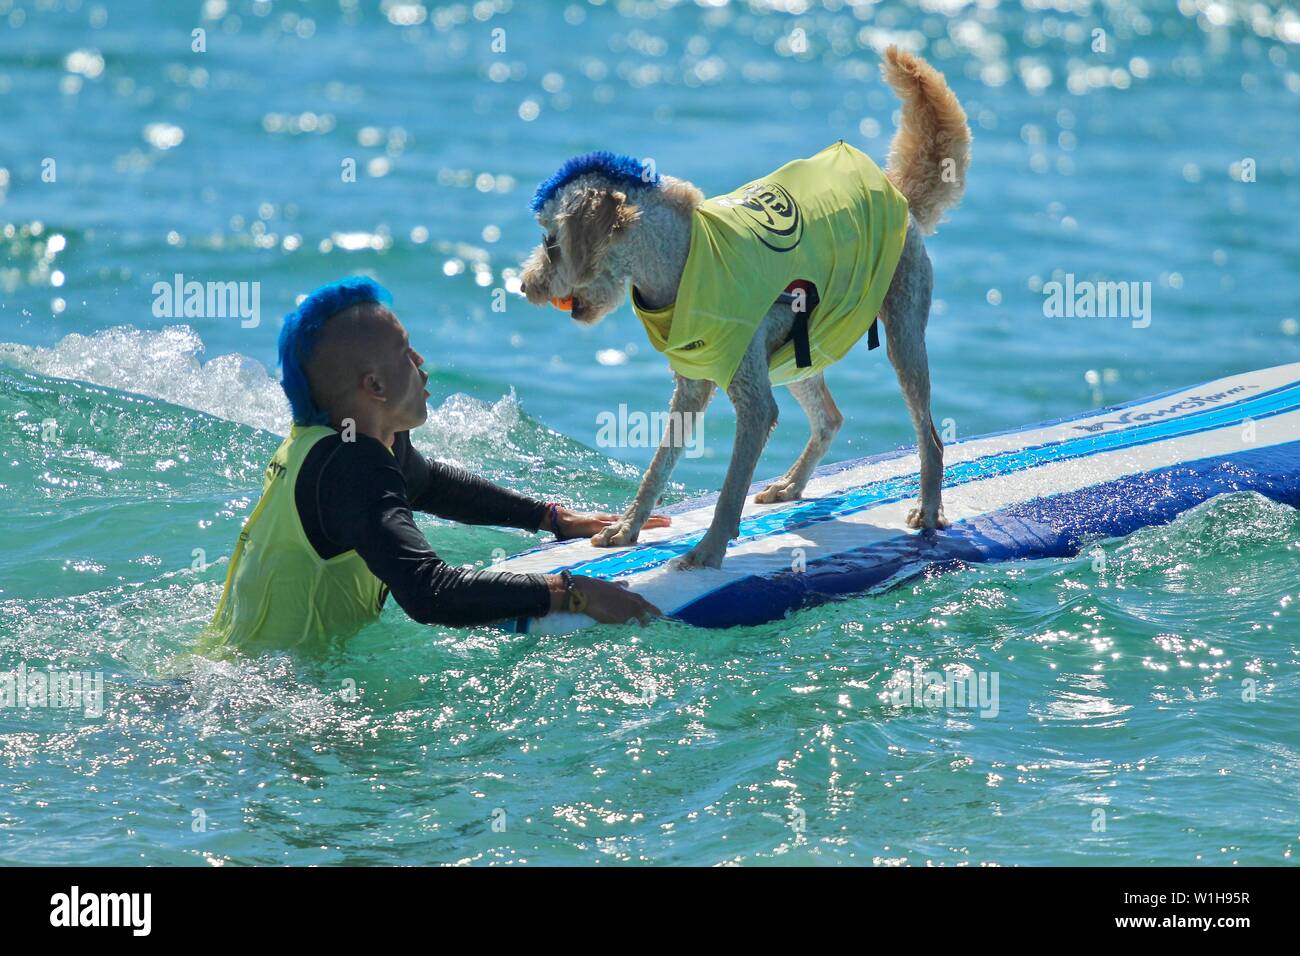 Dog surfing competition in Huntington Beach, California Stock Photo